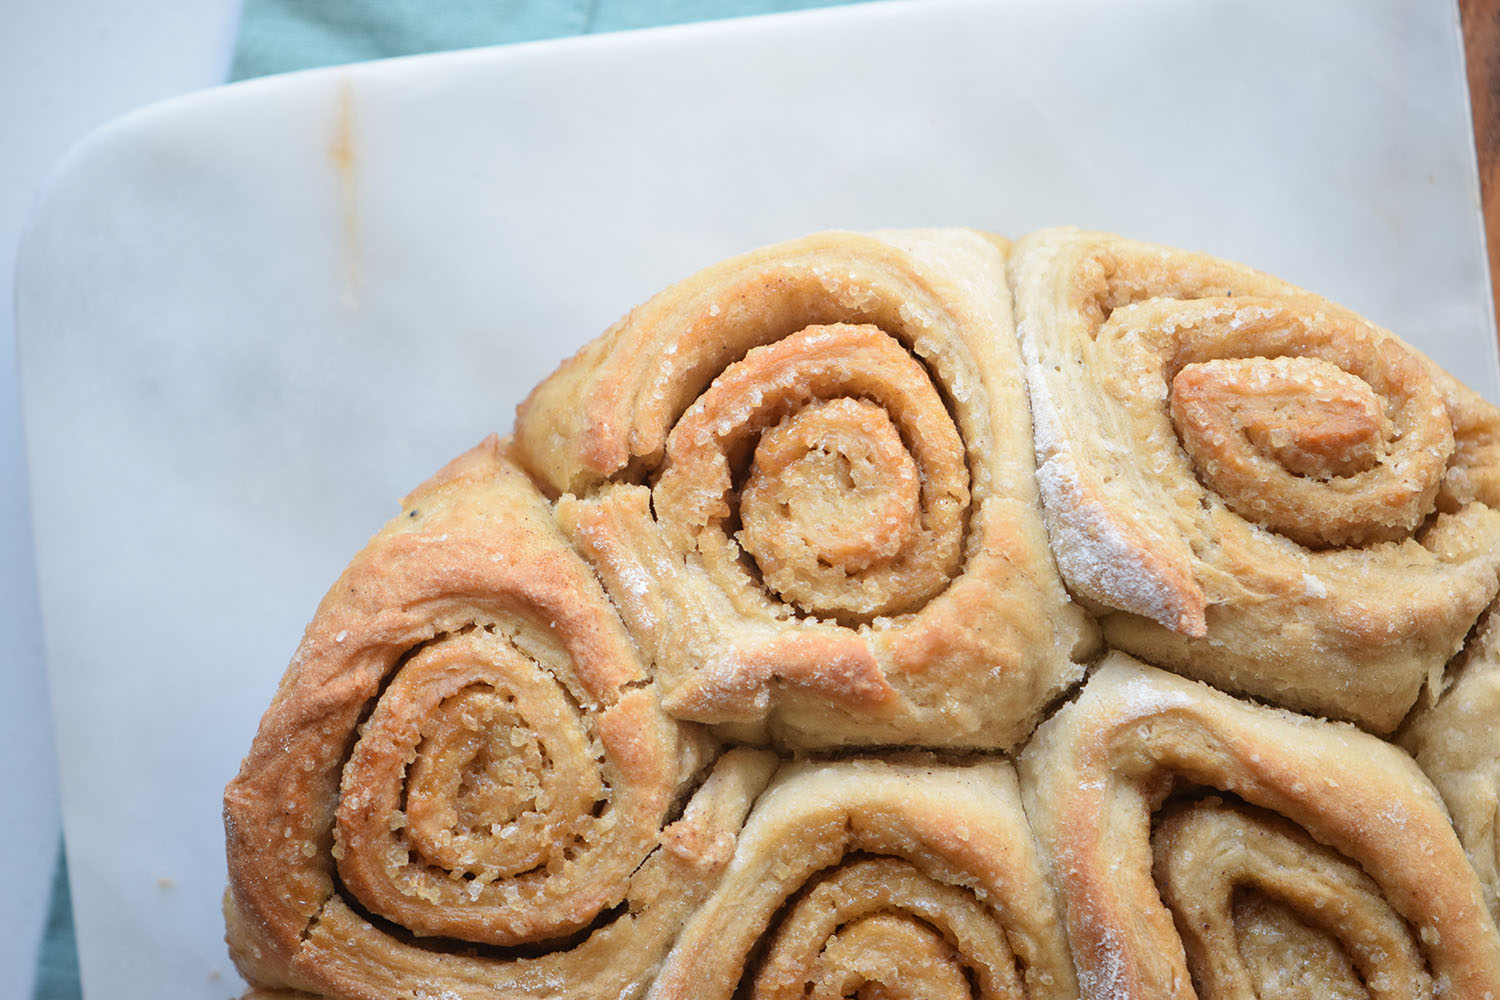 Buttermilk really makes the difference with these Buttermilk Cinnamon Rolls and the brown sugar adds a yummy caramel like flavor.